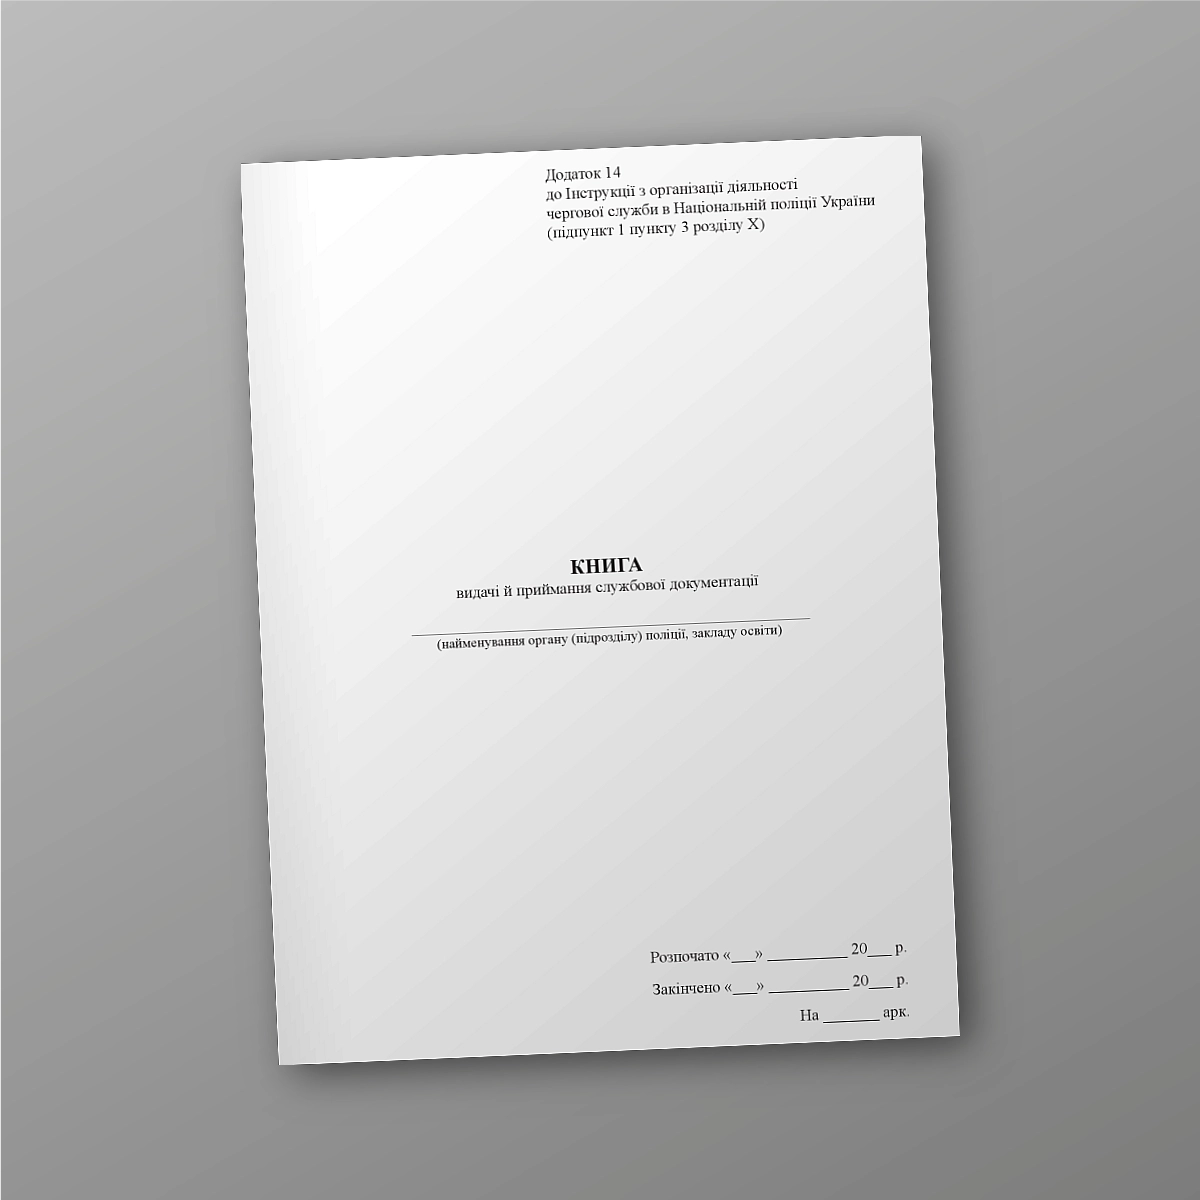 Book of issuance and acceptance of official documentation | PrintTo: